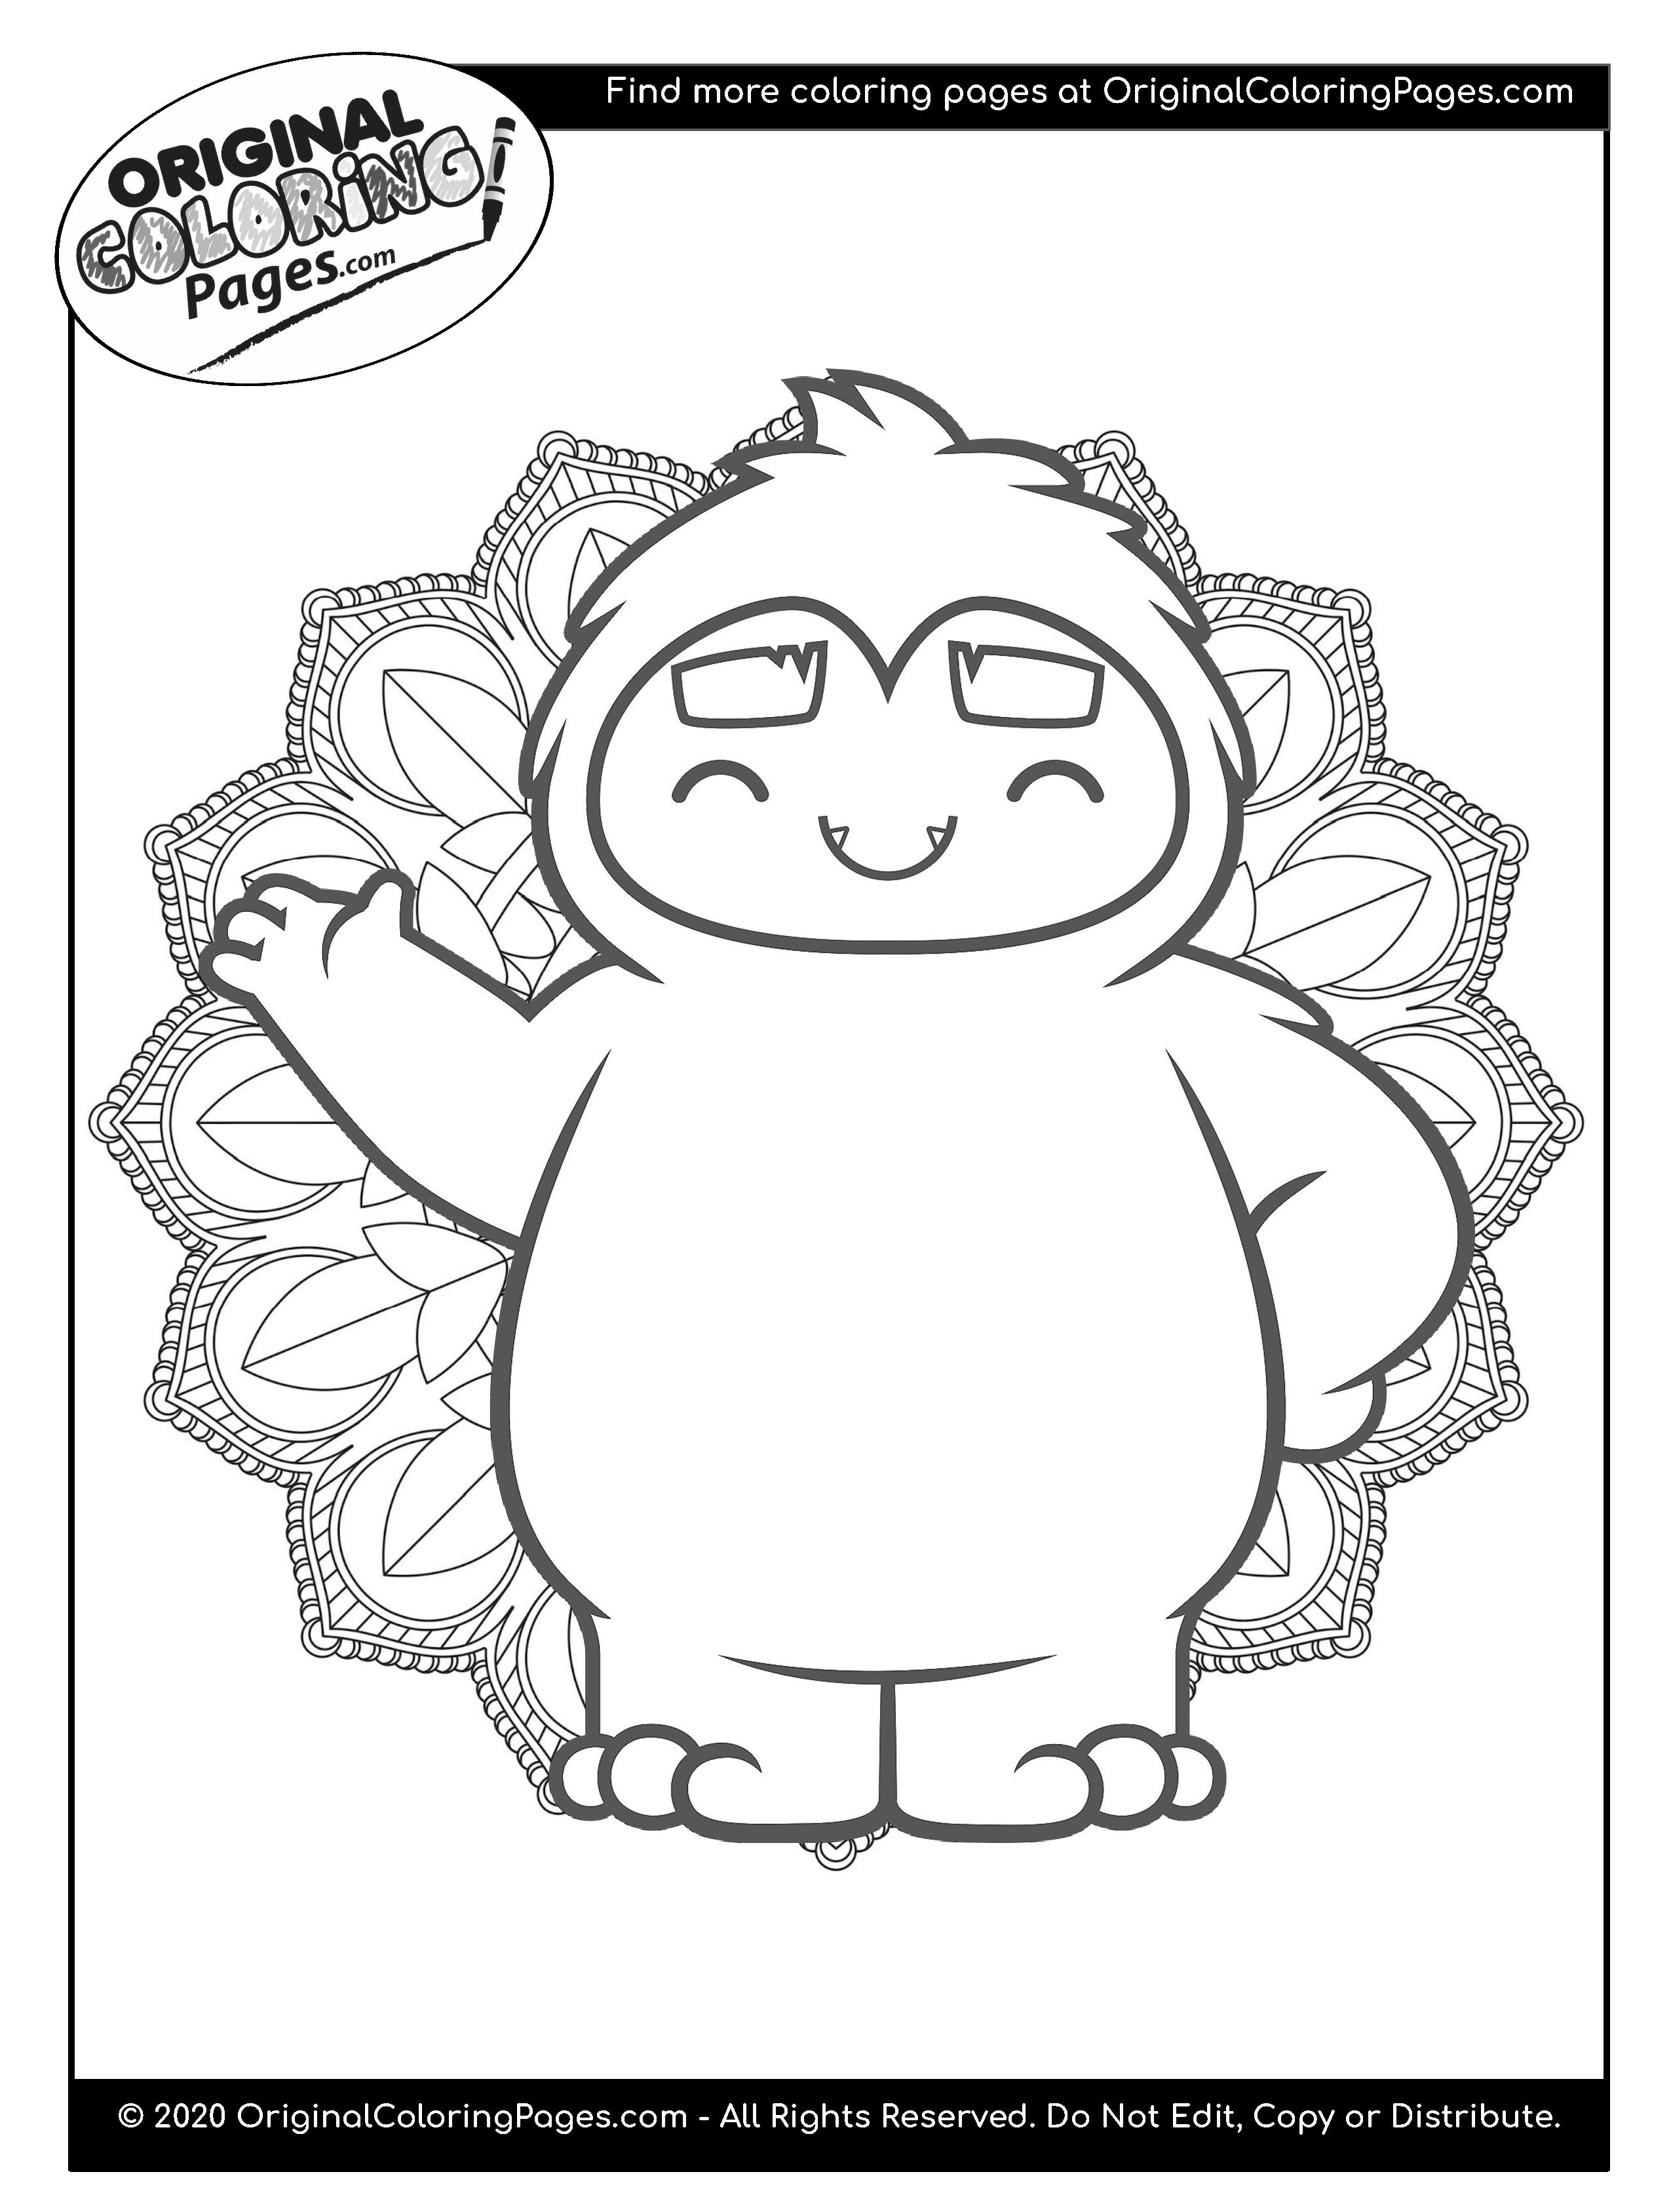 Yeti Coloring Pages - Coloring Home